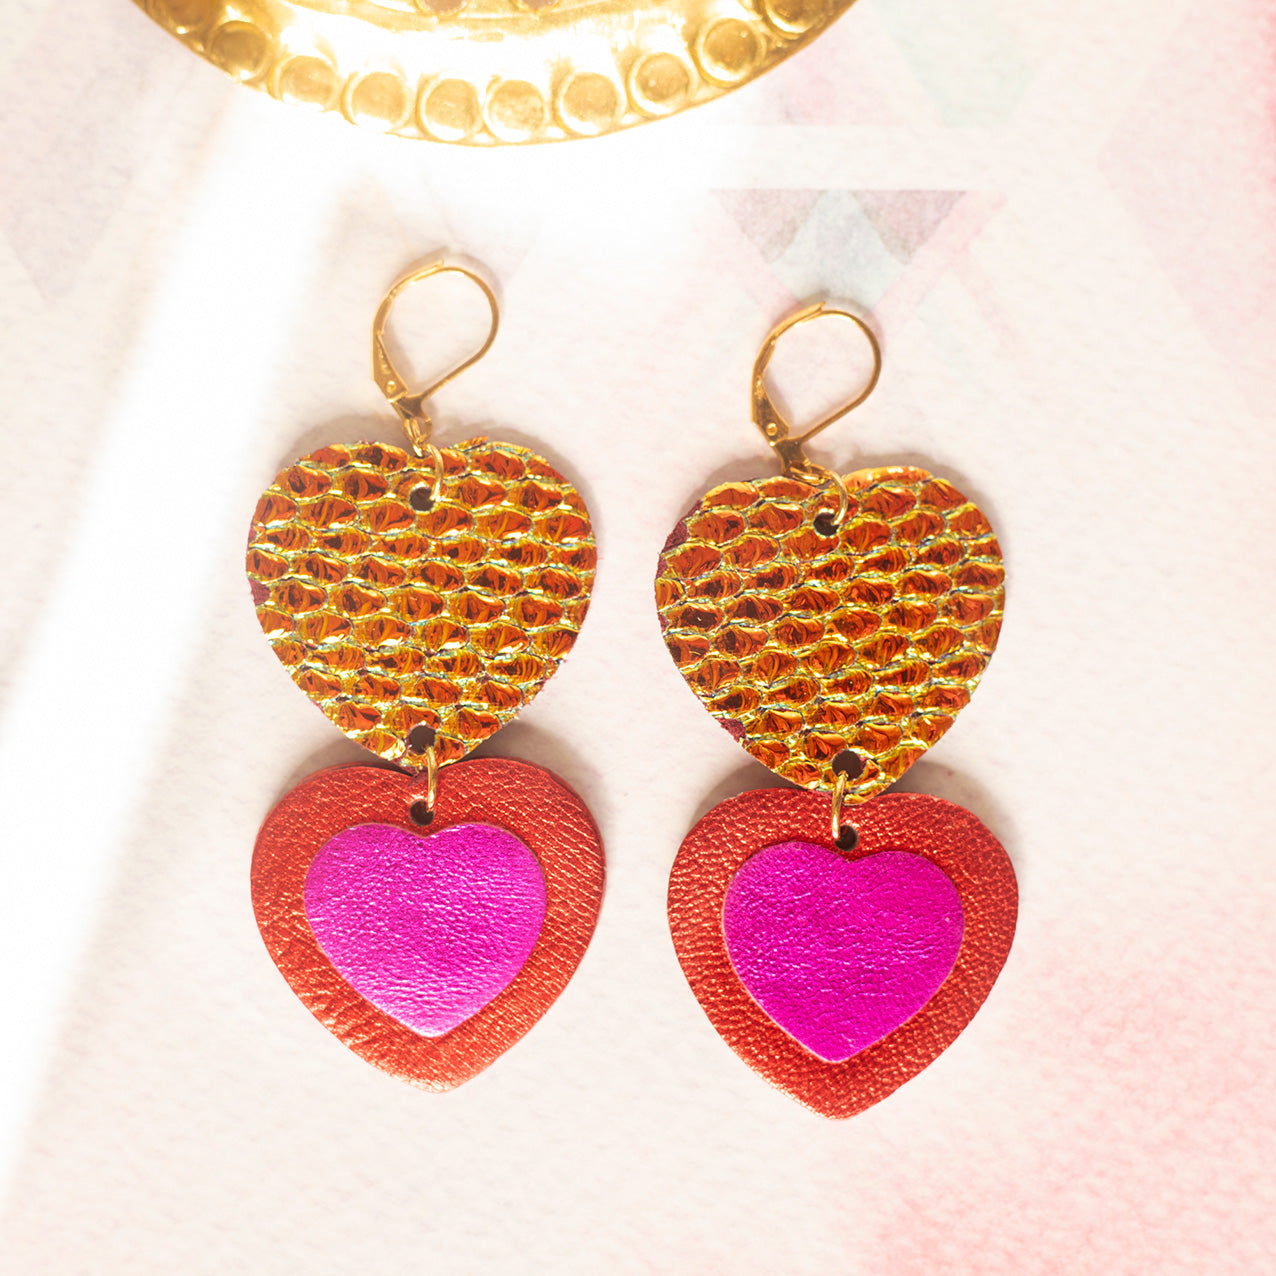 Double Hearts earrings - holographic leather, red and metallic fuchsia